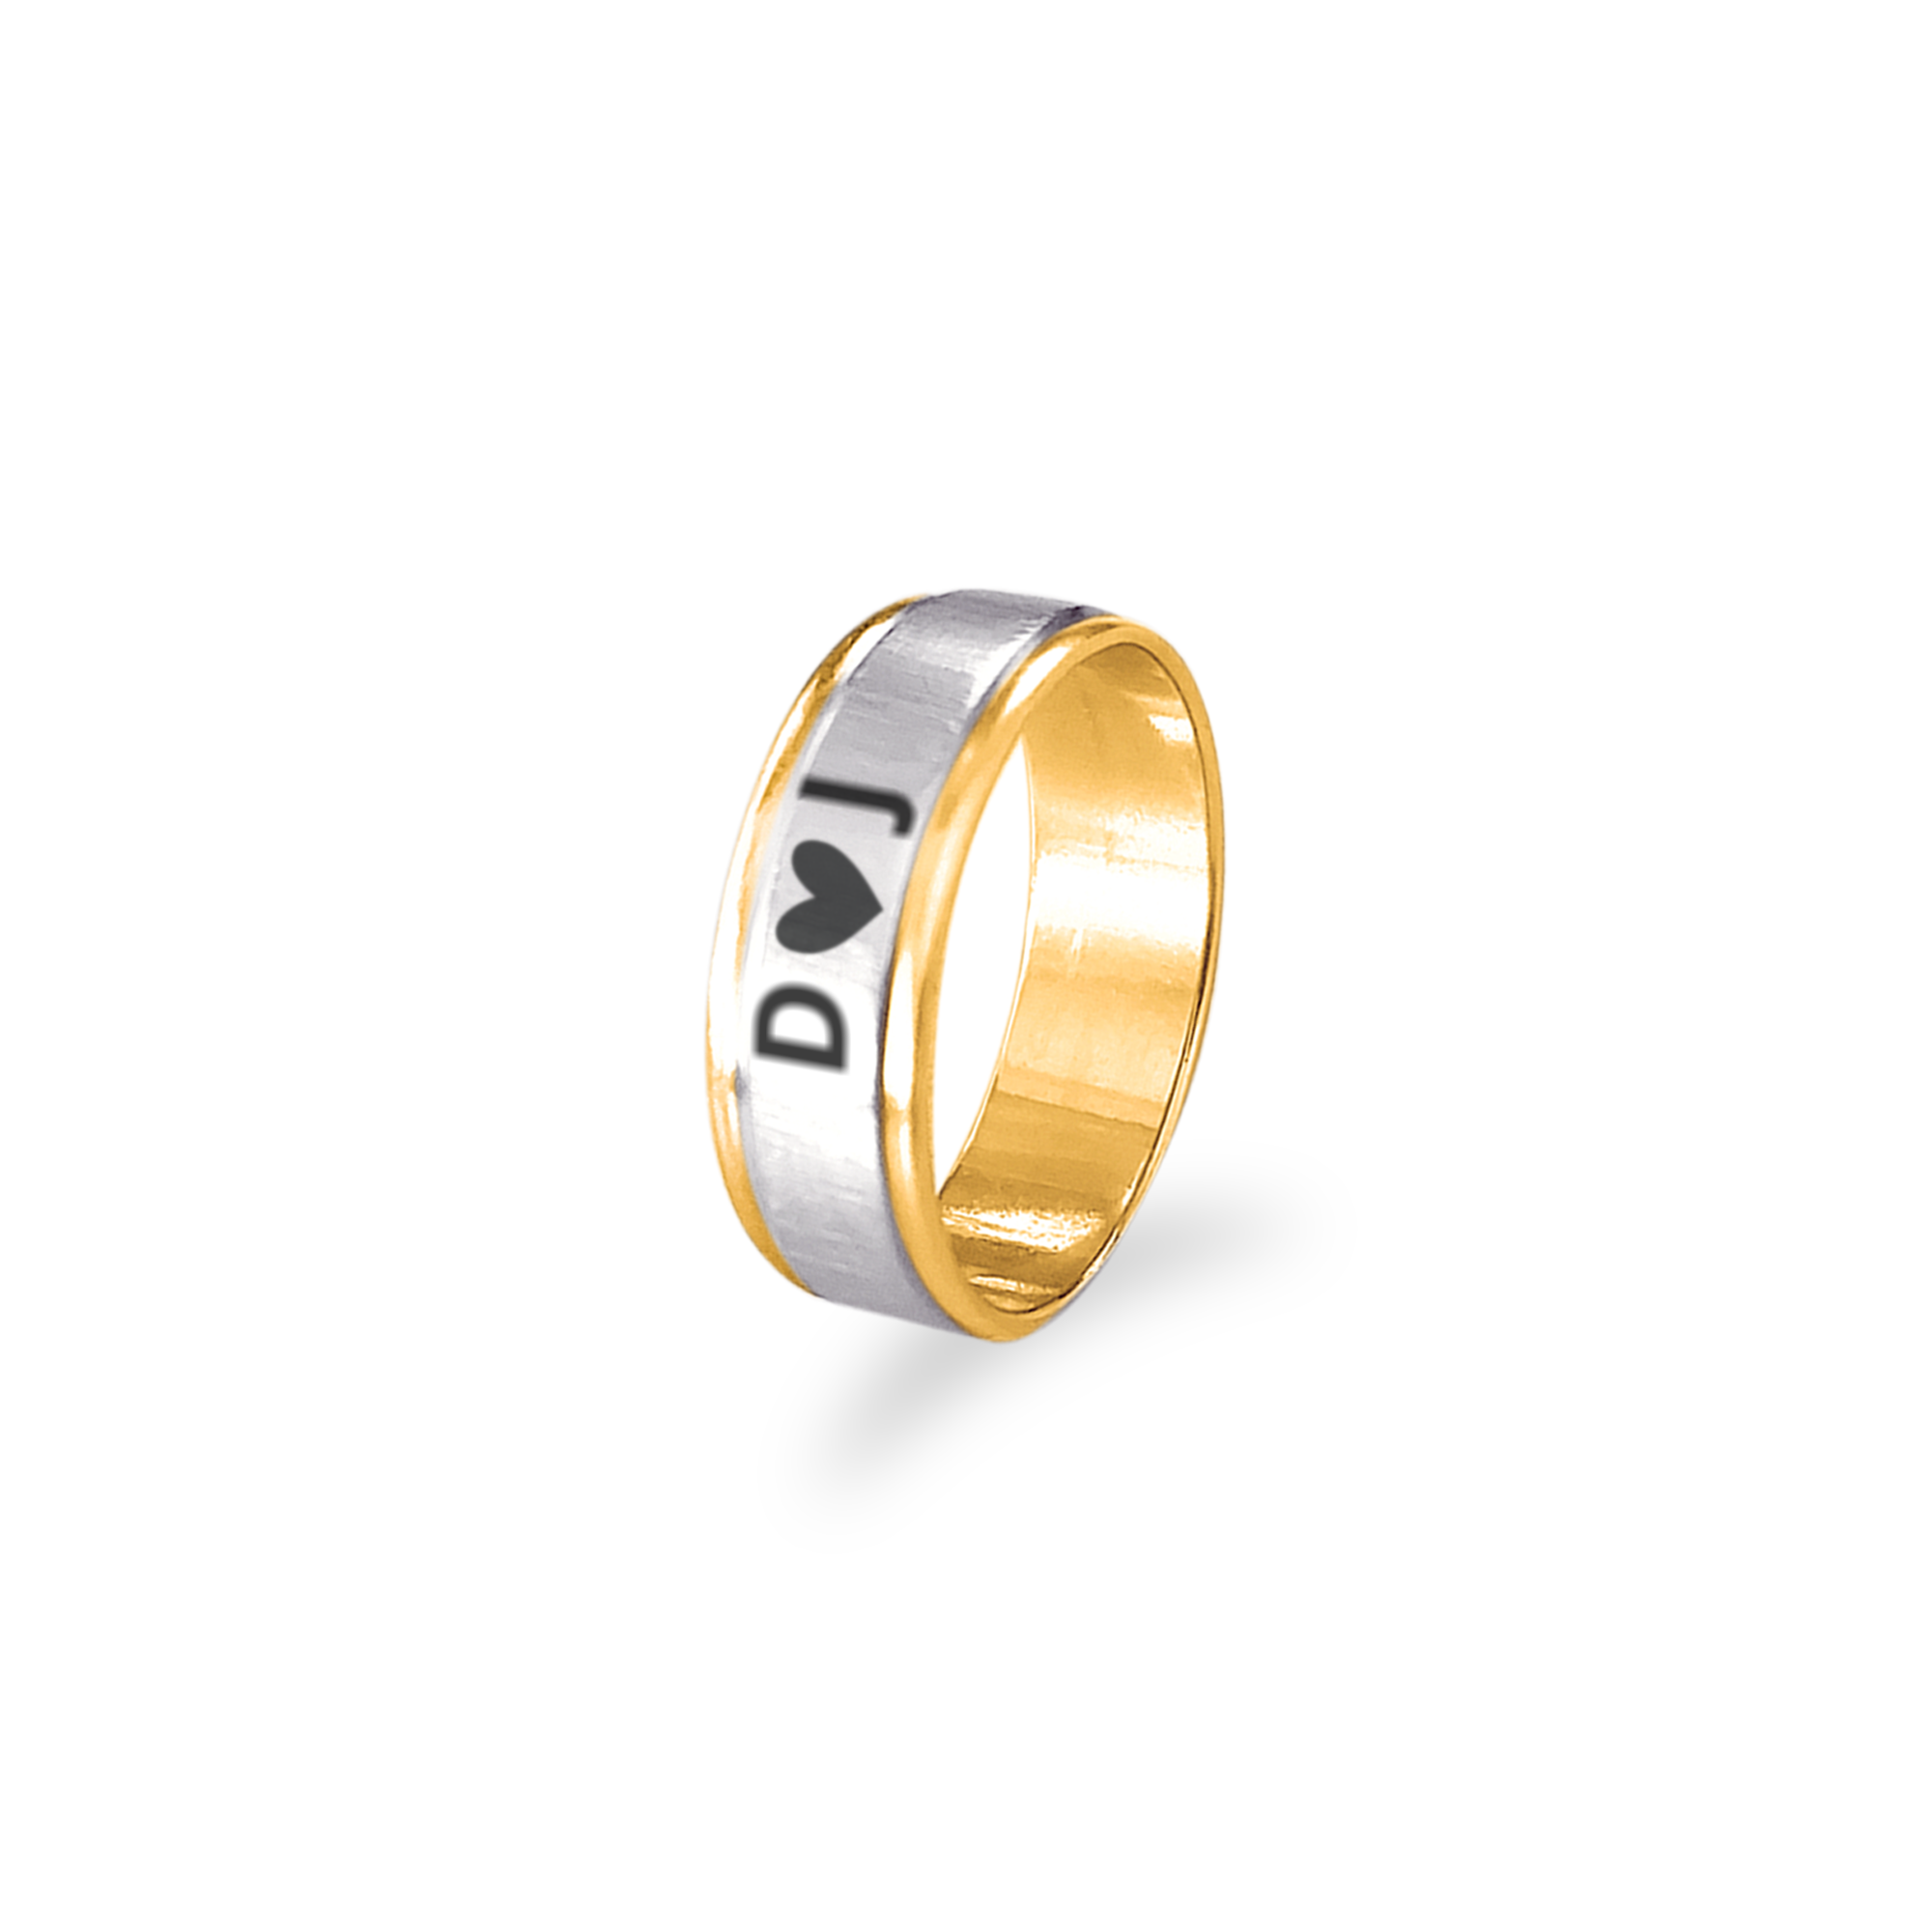 Engraved Couple Ring 4MM & 6MM KCLR 19